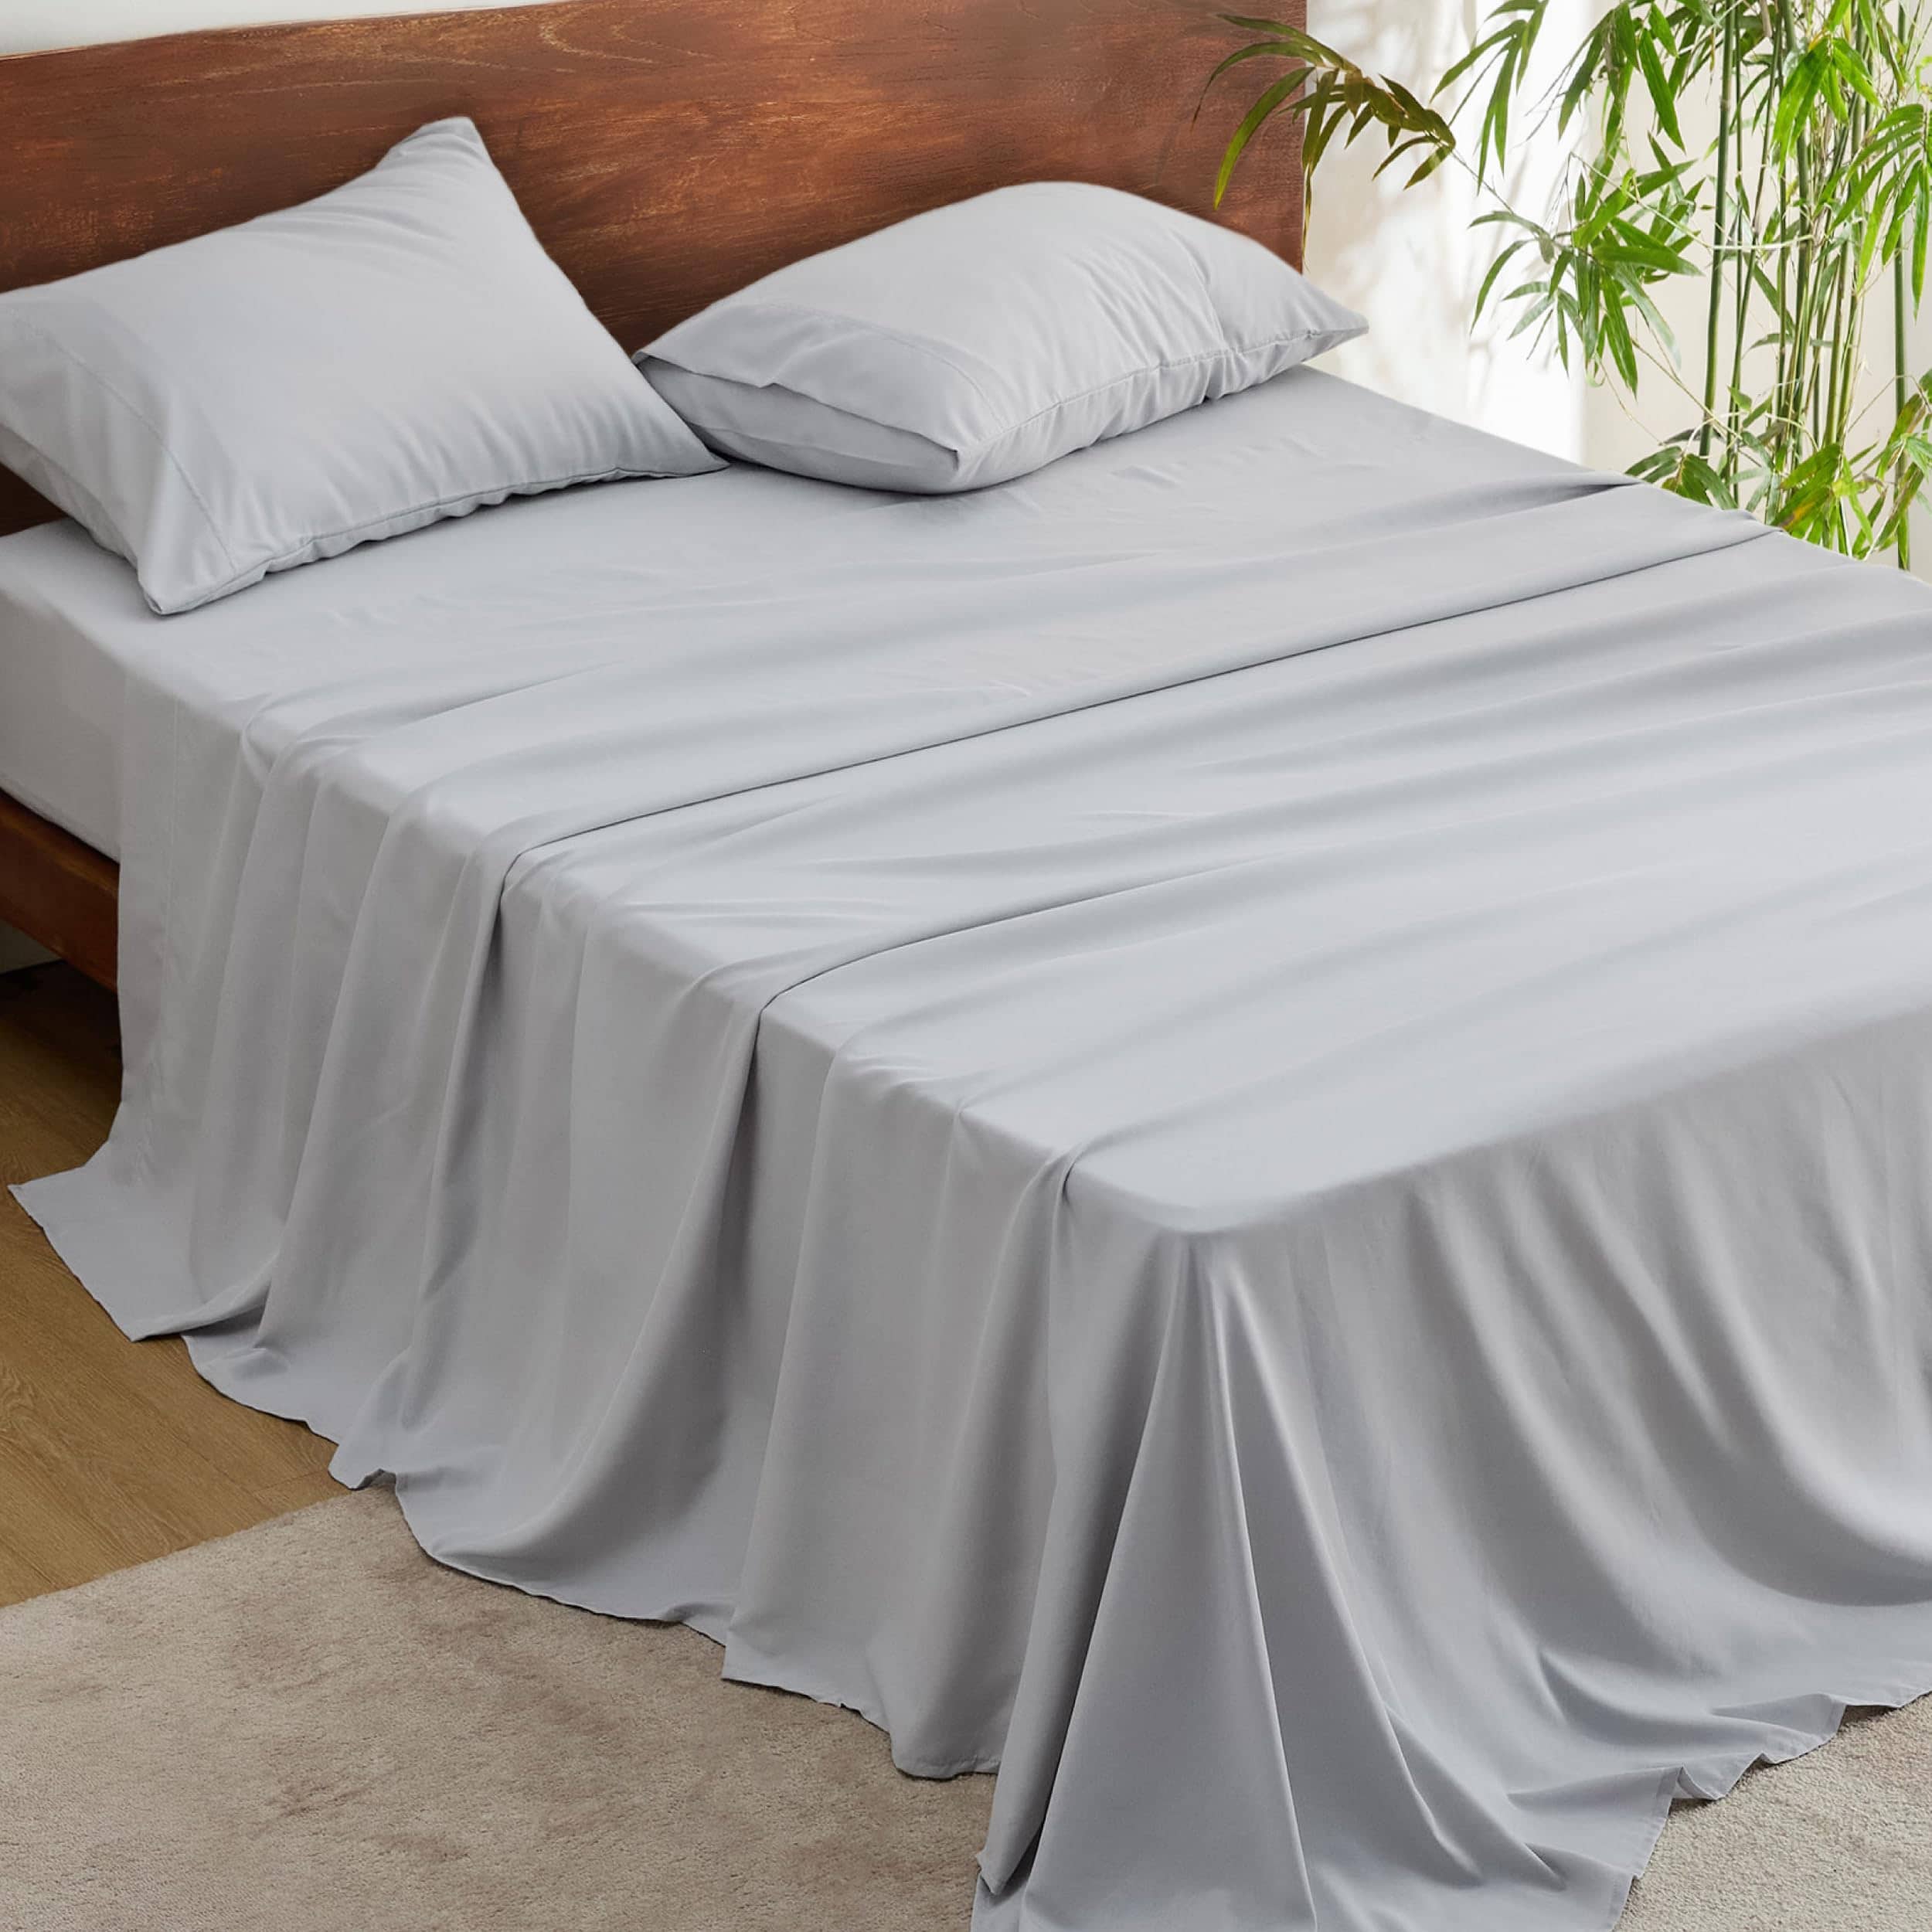 Polyester and Rayon Derived From Bamboo Blend Sheet Set